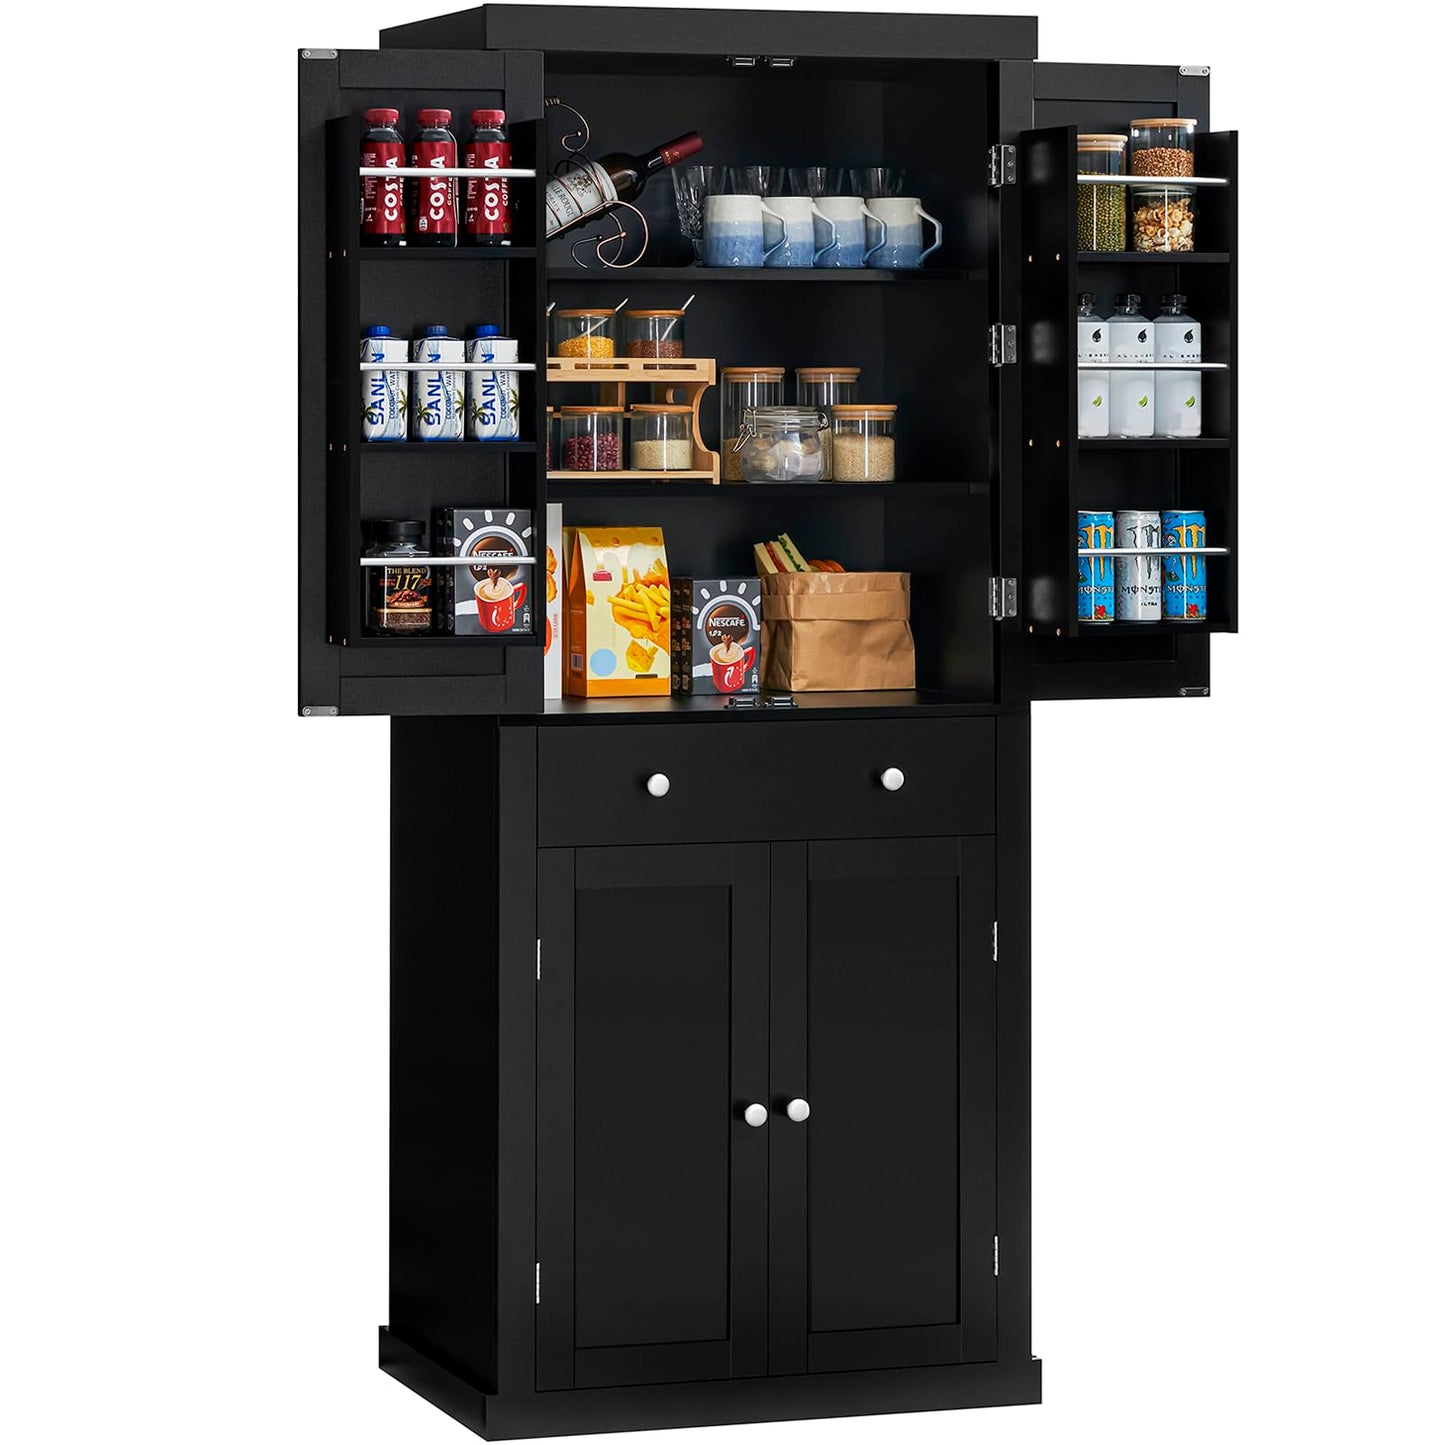 usikey 72” Kitchen Pantry Cabinet, Tall Storage Cabinet with 4 Doors and 1 Drawer, Freestanding Cupboard with 6 Hanging Shelves and Adjustable